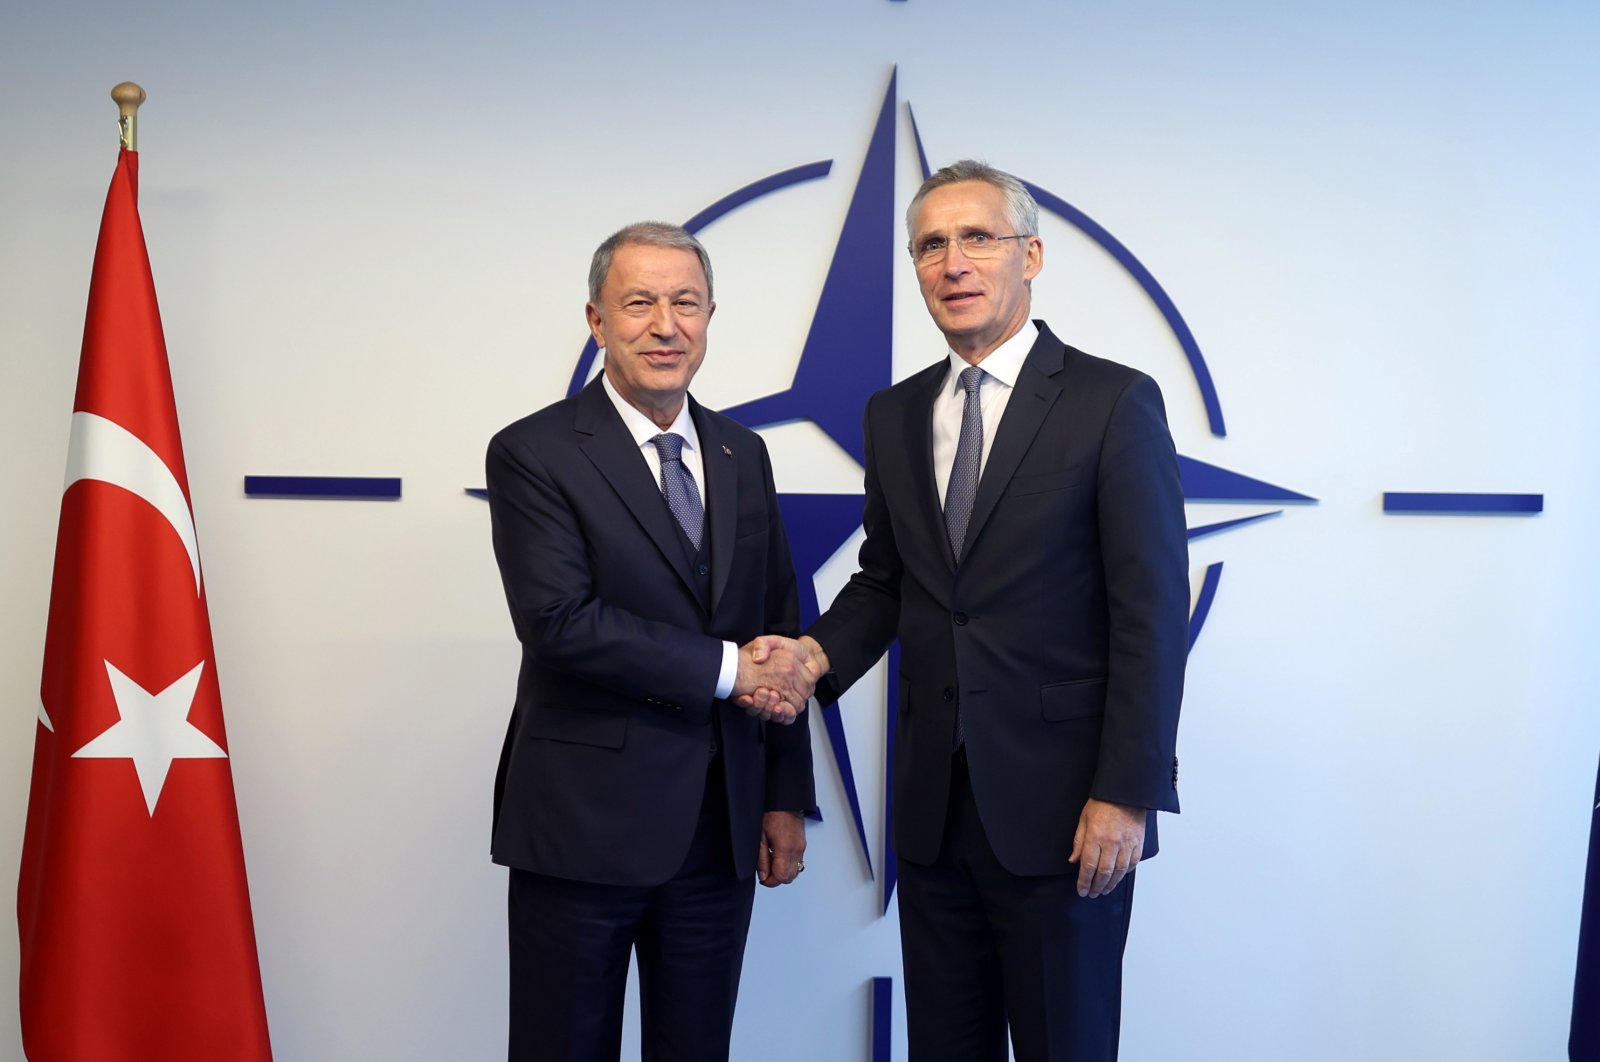 Defense Minister Hulusi Akar shakes hands with NATO chief Jens Stoltenberg in Brussels, Belgium, Oct. 12, 2022. (IHA Photo)